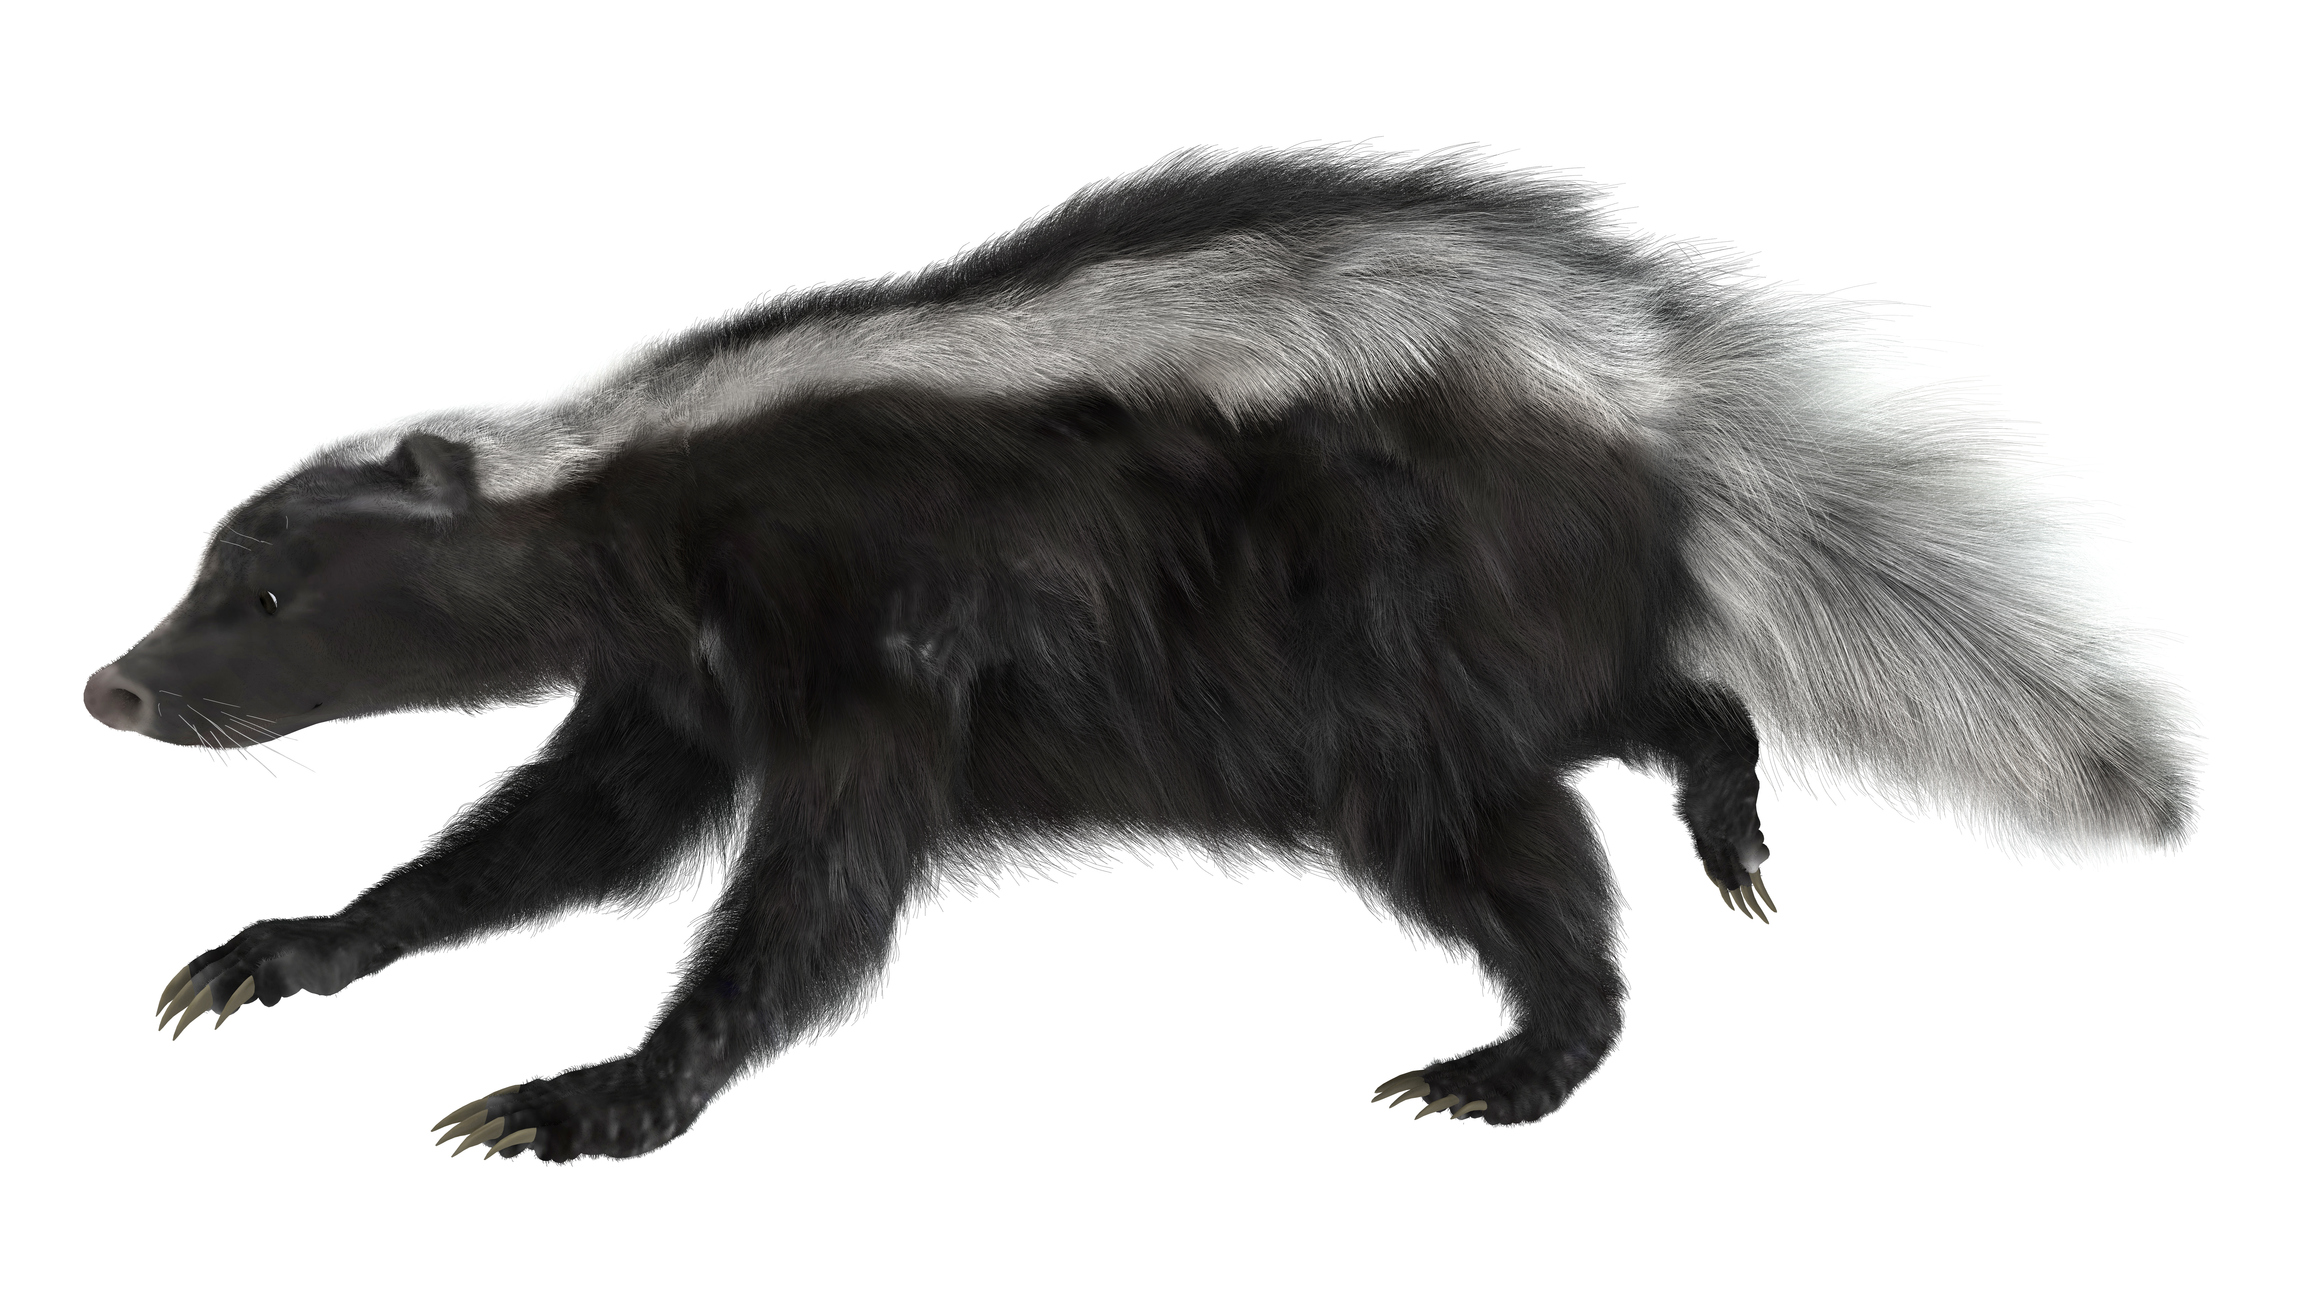 Use Caution with Unfamiliar Wild Animals: Skunk Tests Positive for Rabies  After Attacking Feral Cat - State of Delaware News